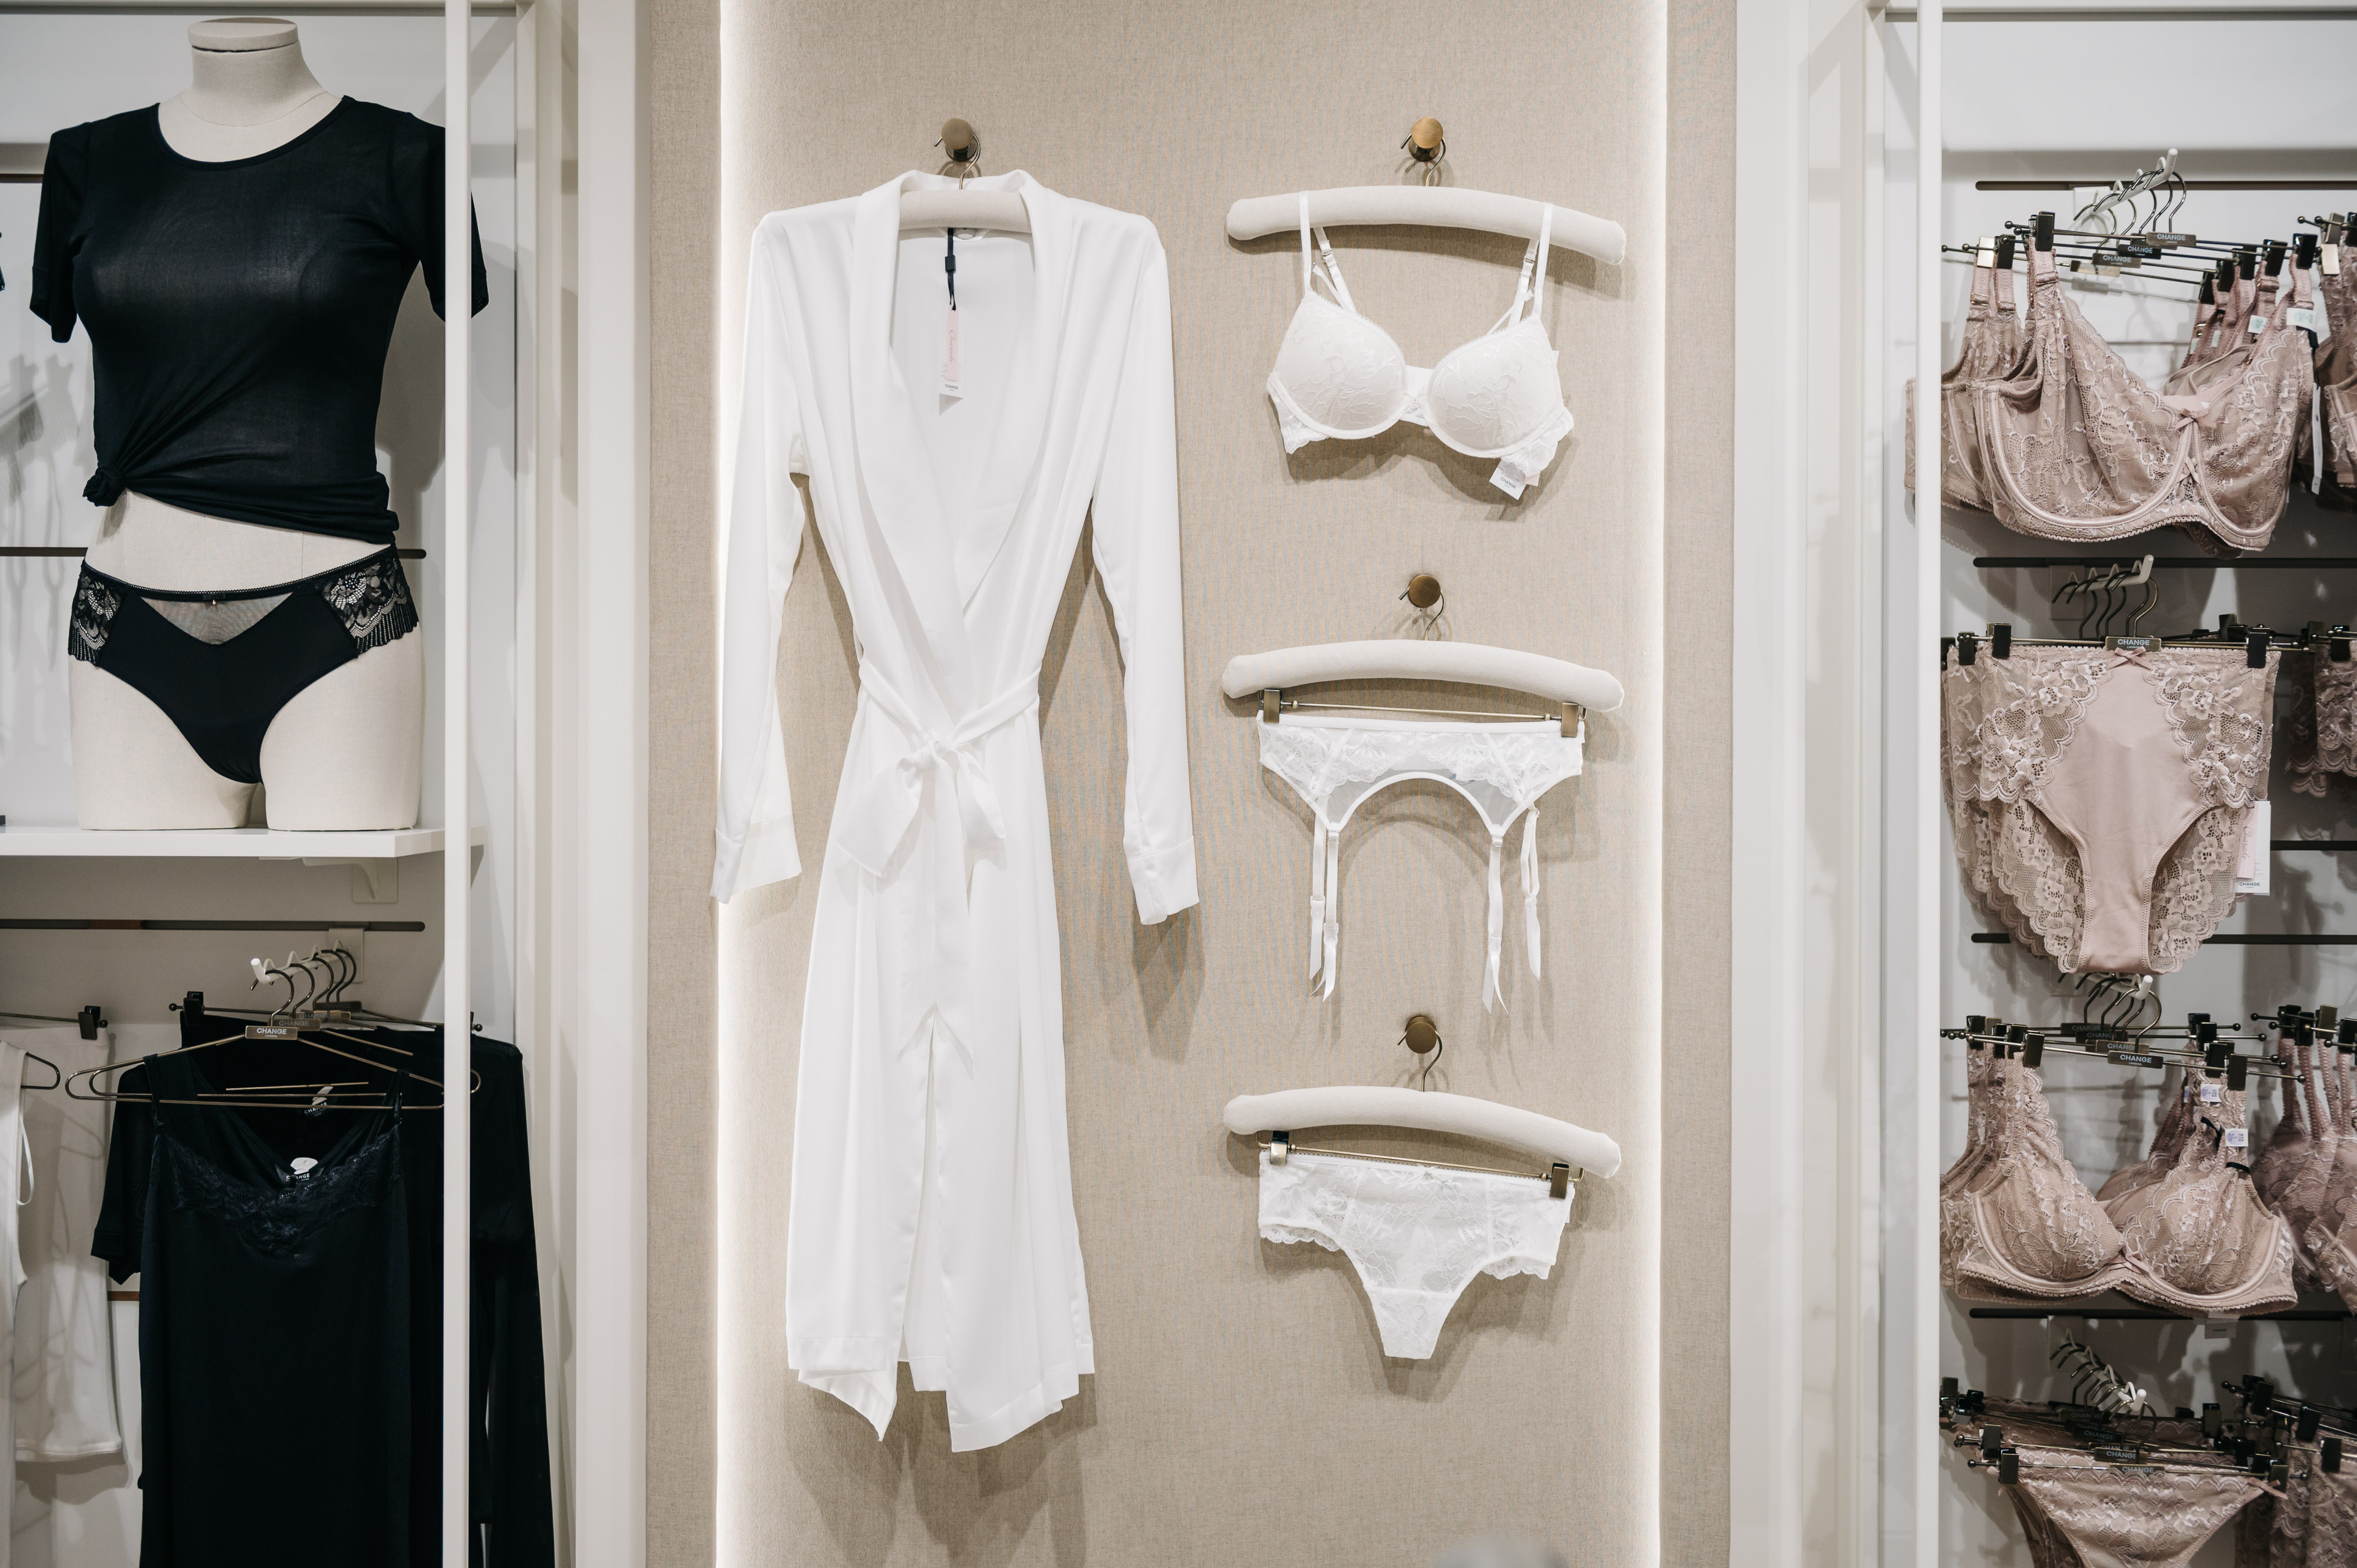 Shopping center Spice opens the first newest concept “CHANGE Lingerie”  store in the Baltics